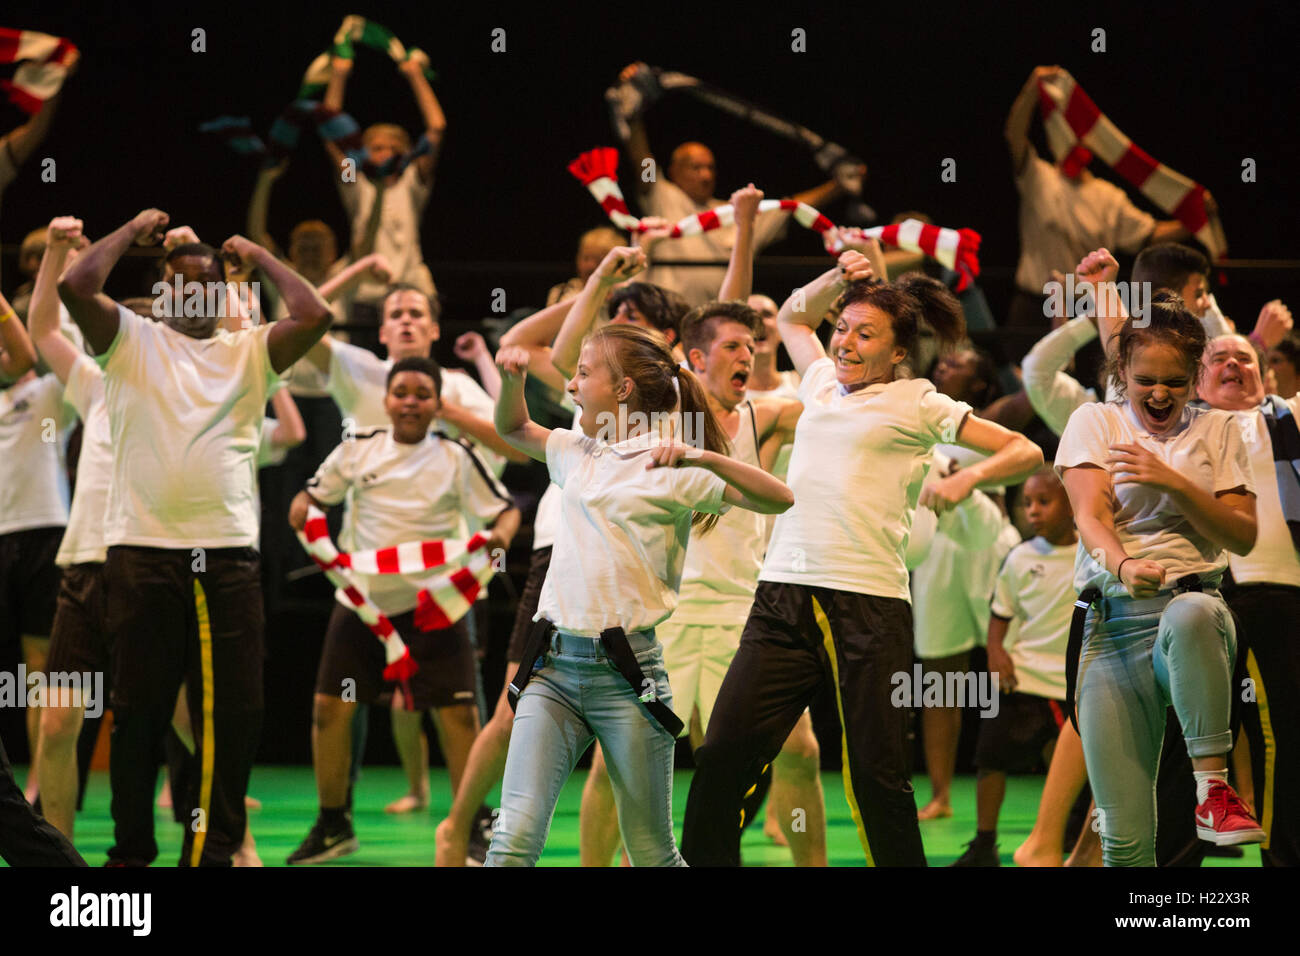 London, UK. 23 September 2016. Sadler's Wells and West Ham United Foundation present the World Premiere of Home Turf, a dance production inspired by football, on the main stage at Sadler's Wells on Saturday, 24 September 2016. Home Turf is a collaboration between West Ham United Foundation, Sadler's Wells and a team of over 100 professional and non-professional dancers, including Foundation participants, Company of Elders and alumni of the National Youth Dance Company. Stock Photo